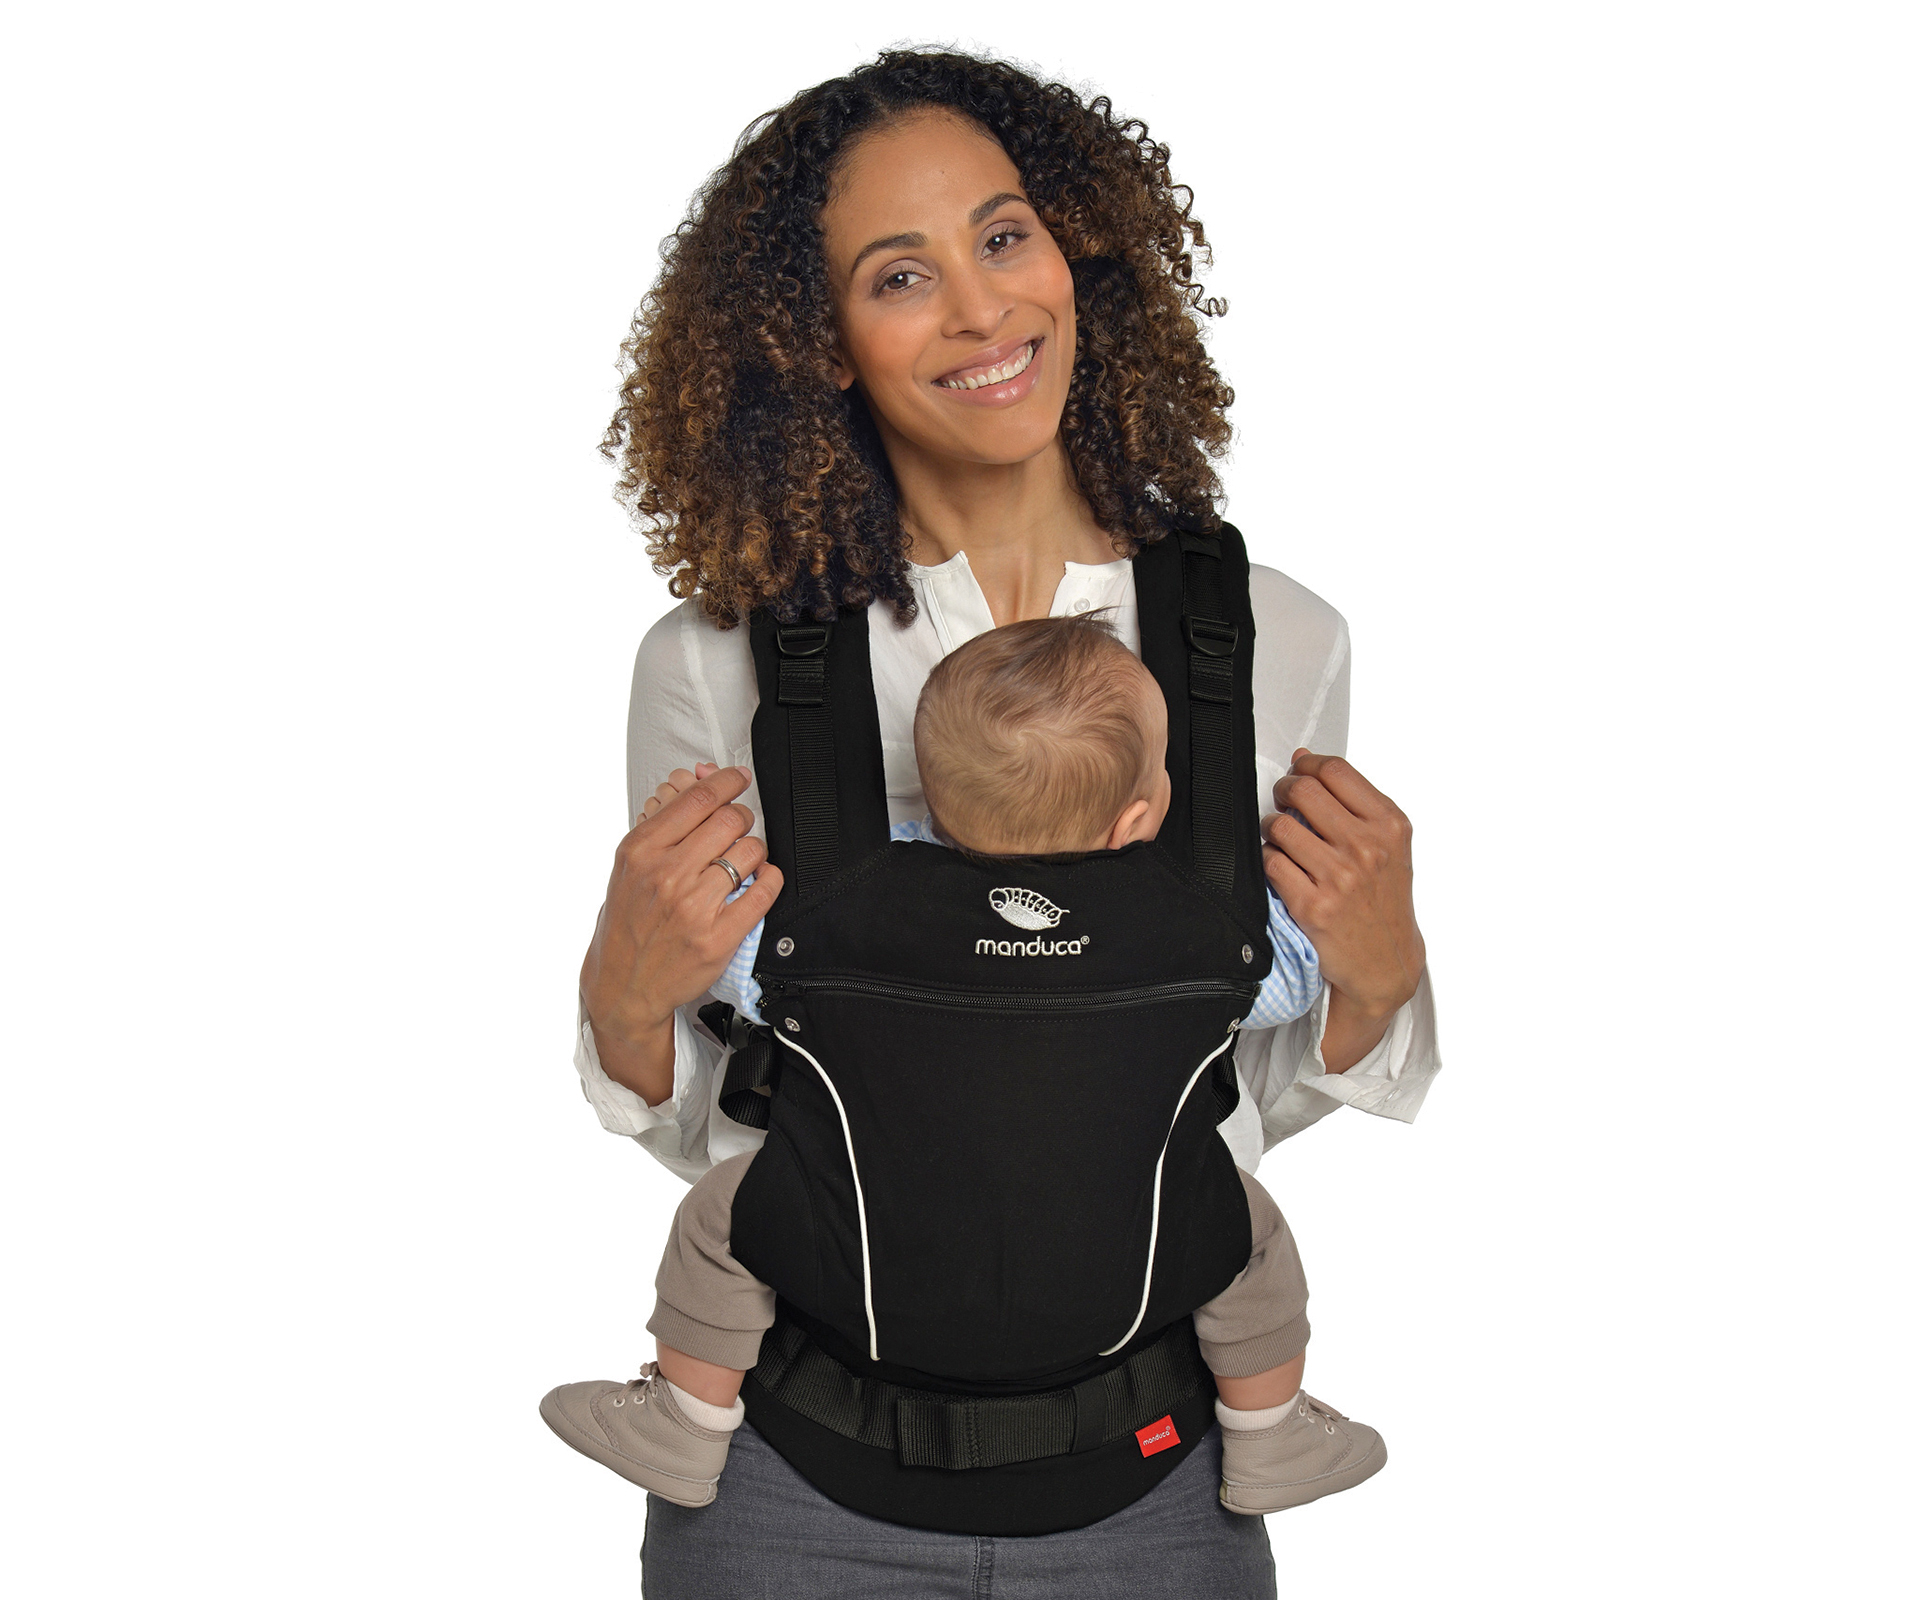 stylish baby carrier